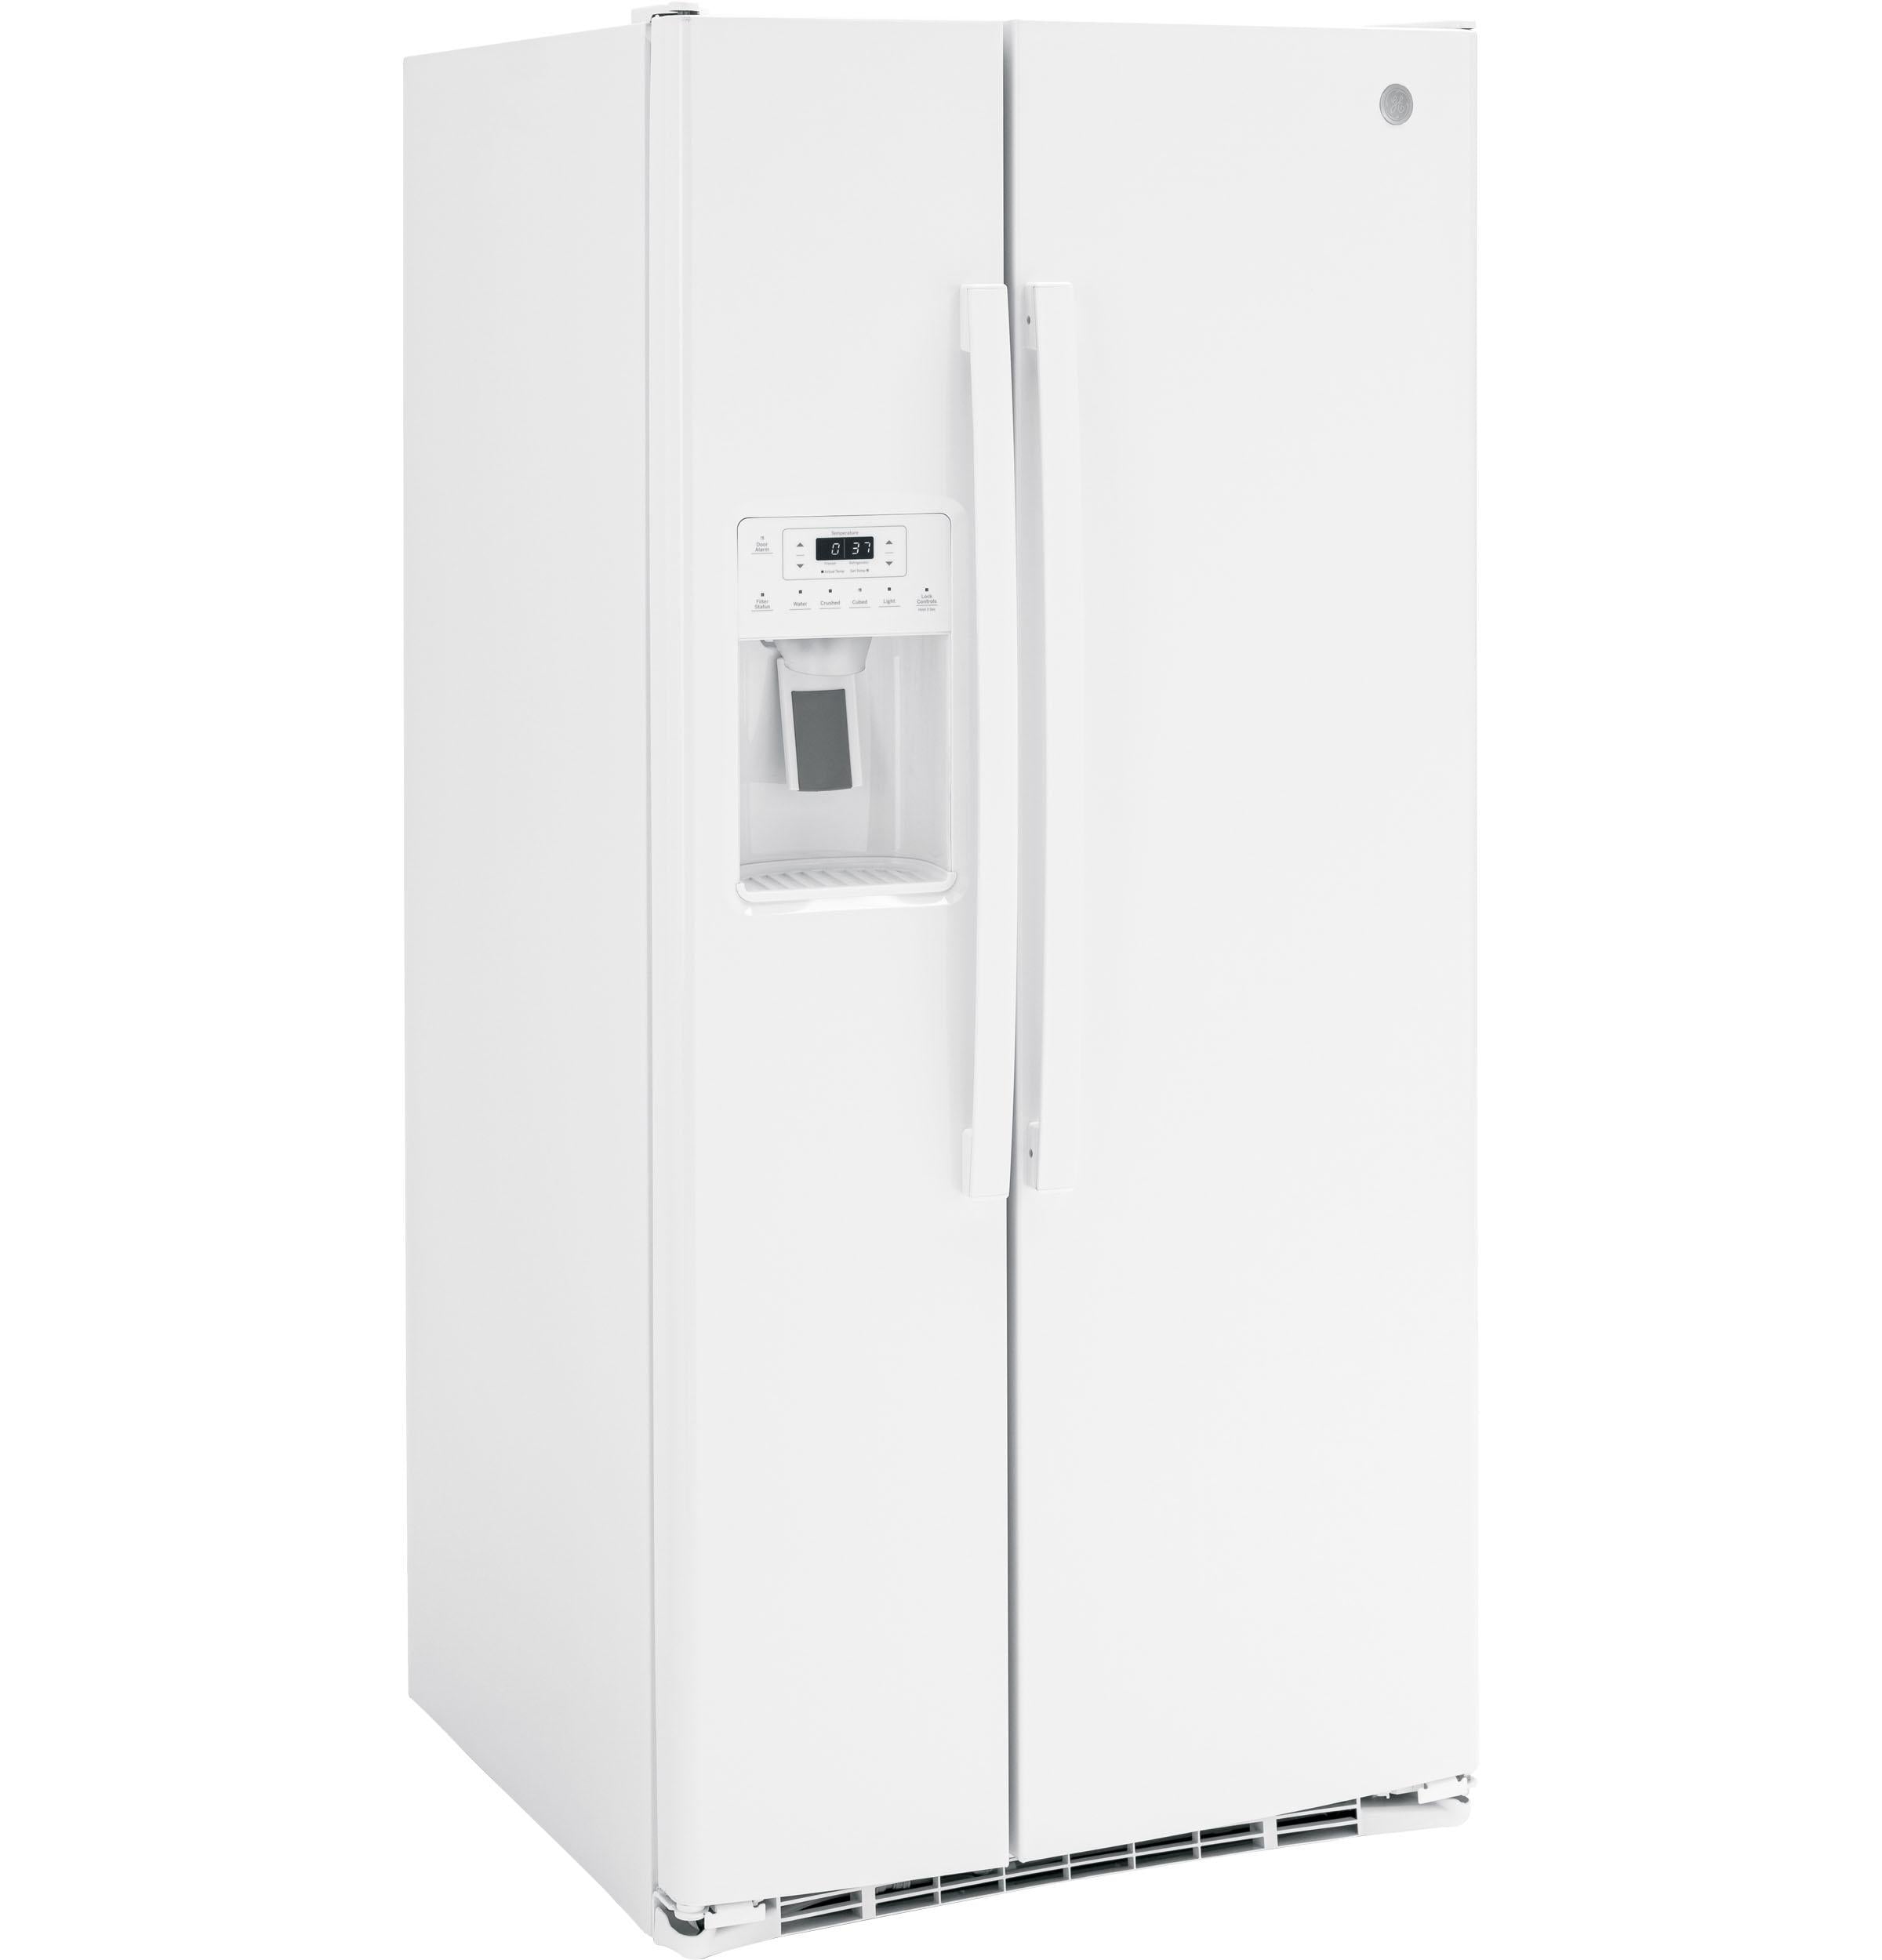 GE Energy Star 23.0 Cu. ft. Side-By-Side Refrigerator White GSE23GGPWW